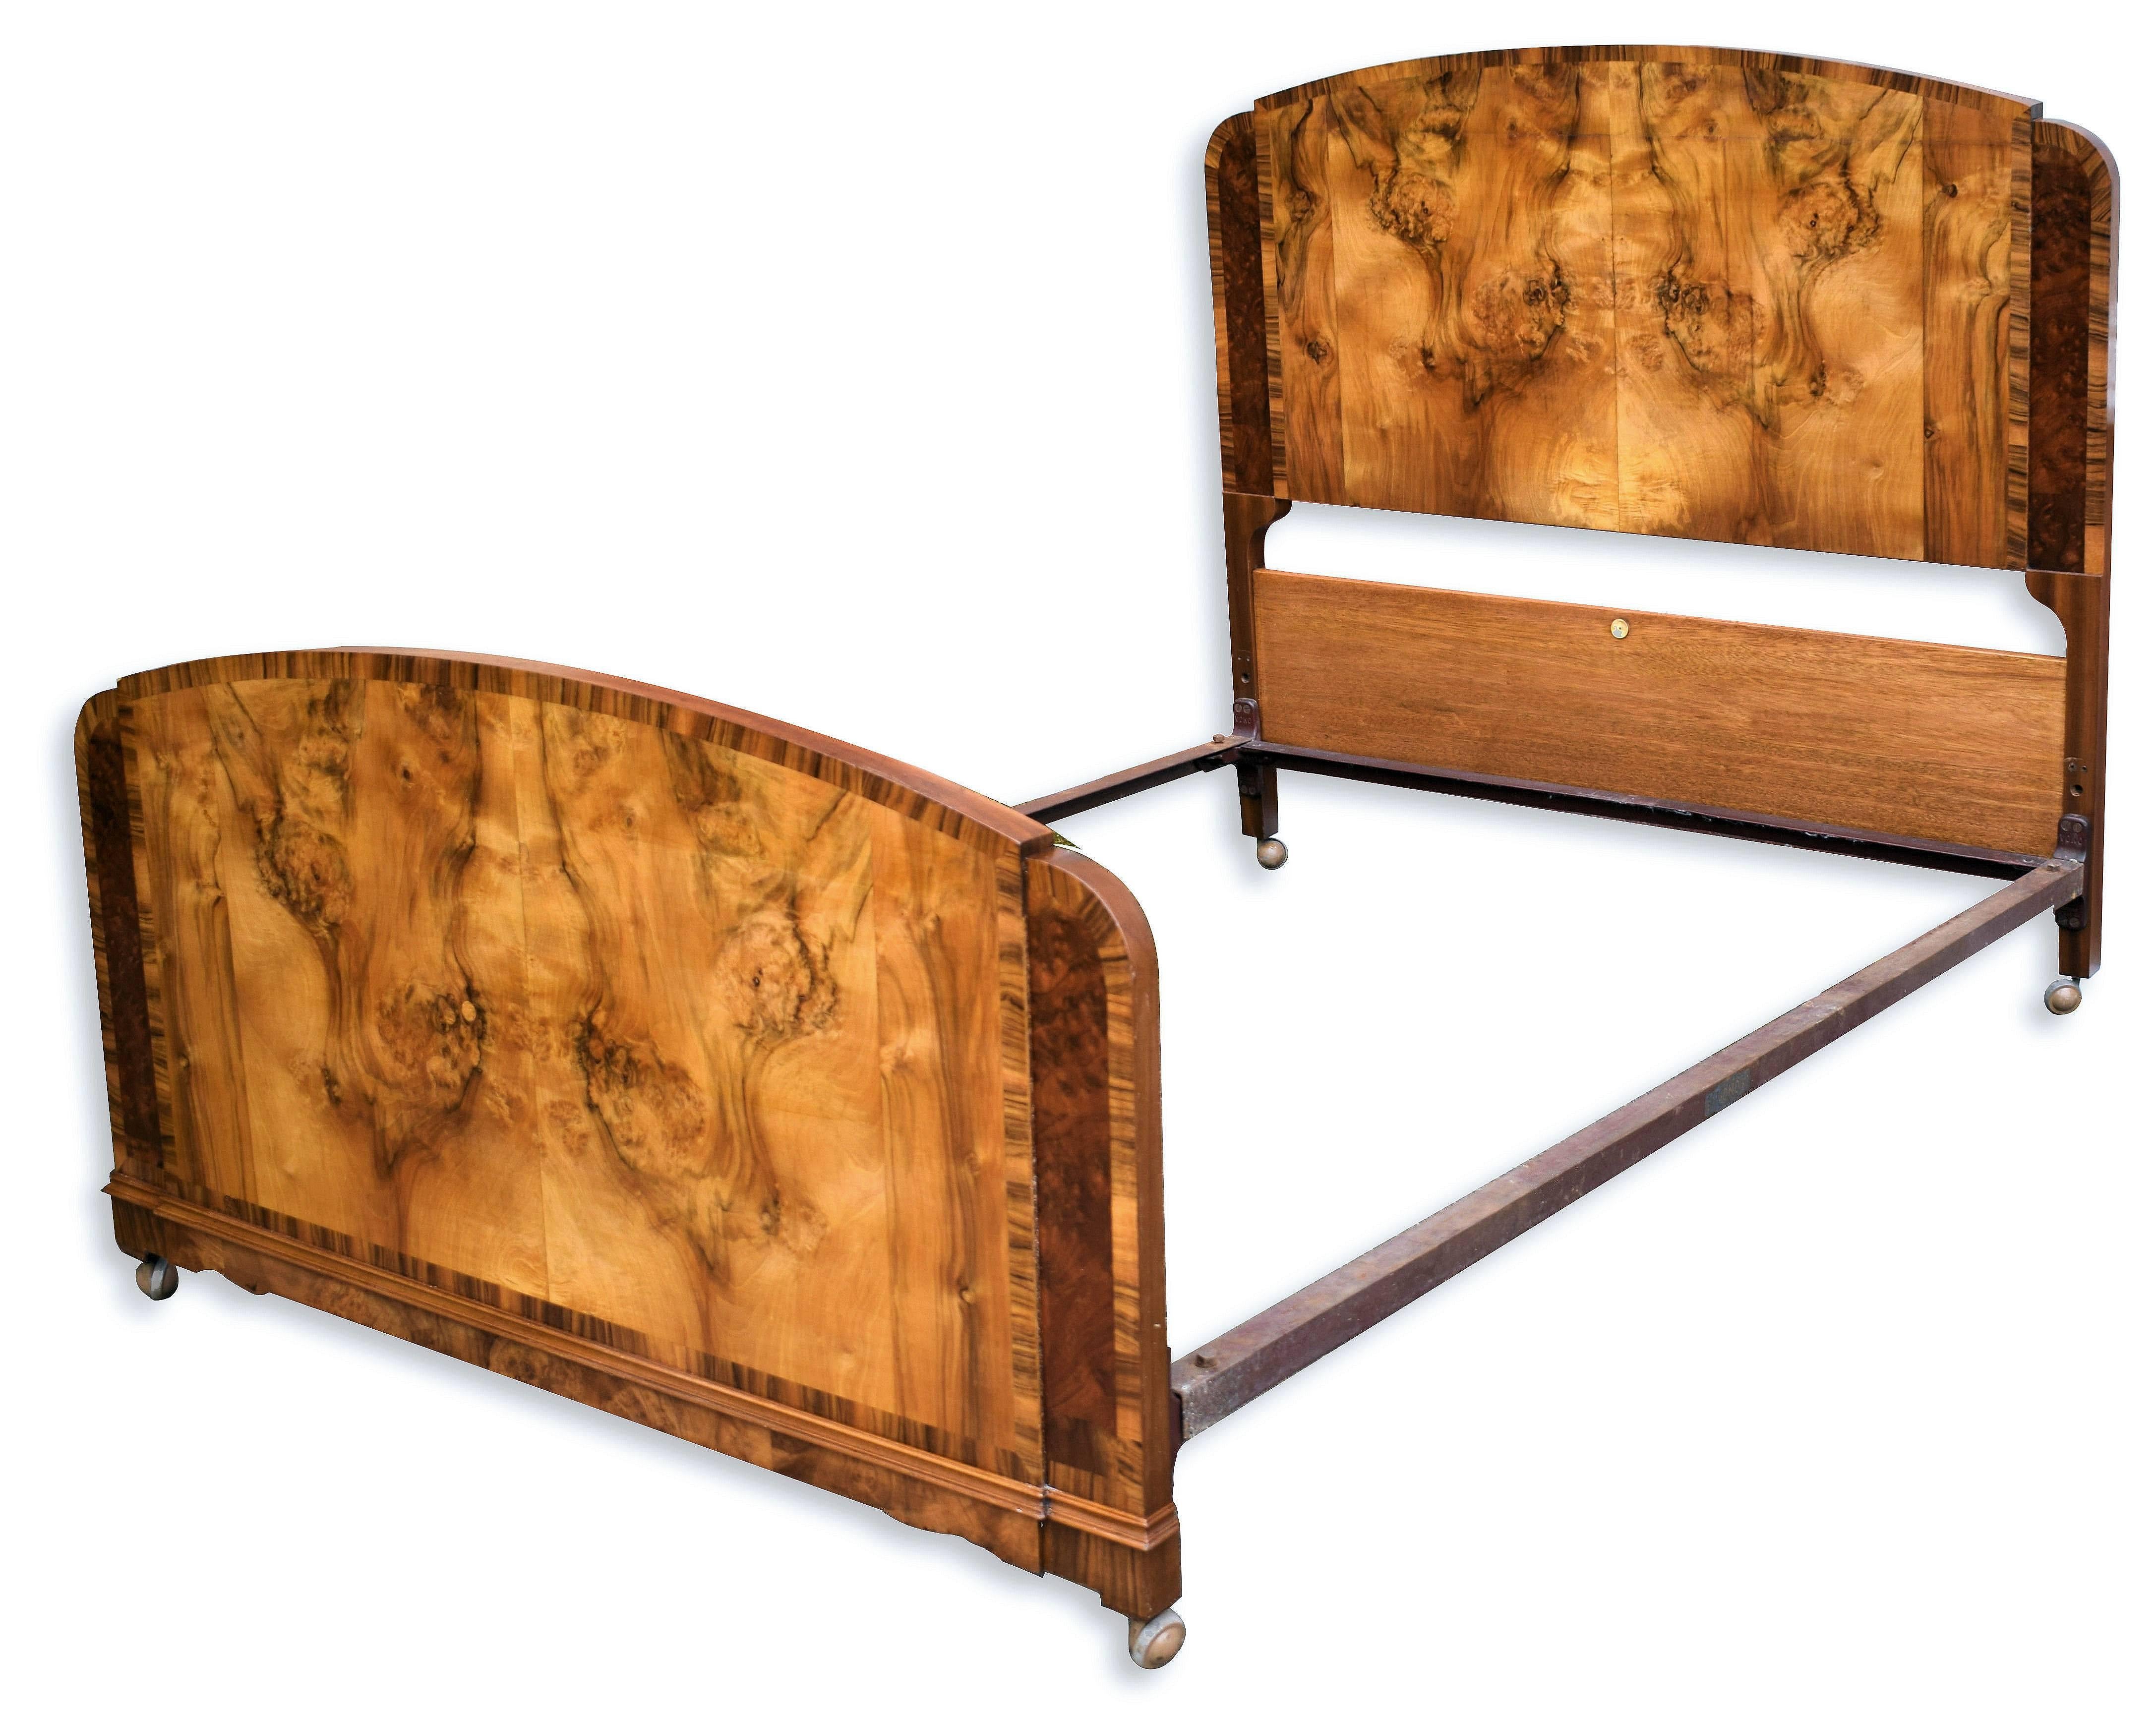 Fabulous 1930s Art Deco walnut bed originates from England. The veneers are so beautifully detailed, the quality oozes from this bed. Features headboard, footboard and two side irons. We've had this bed fully restored in our workshops so it comes to